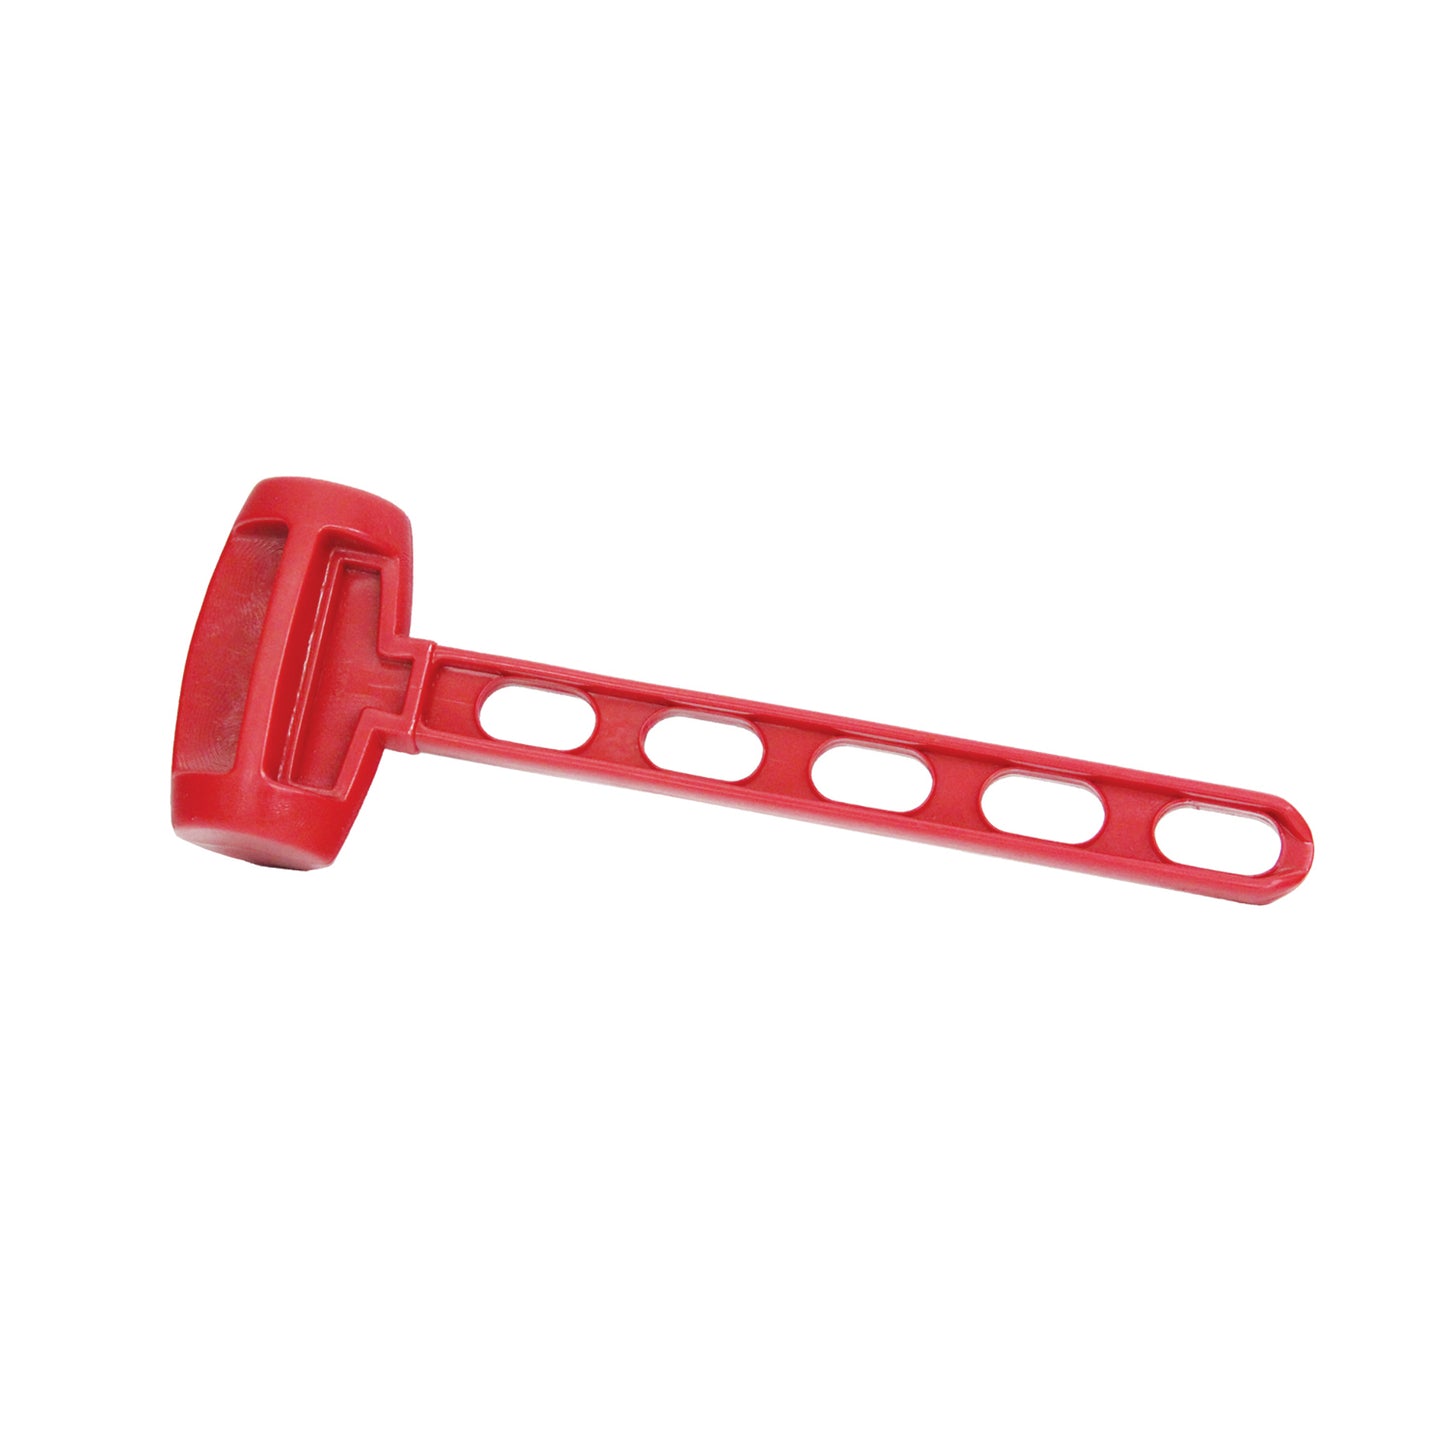 TENT STAKE HAMMER & REMOVER